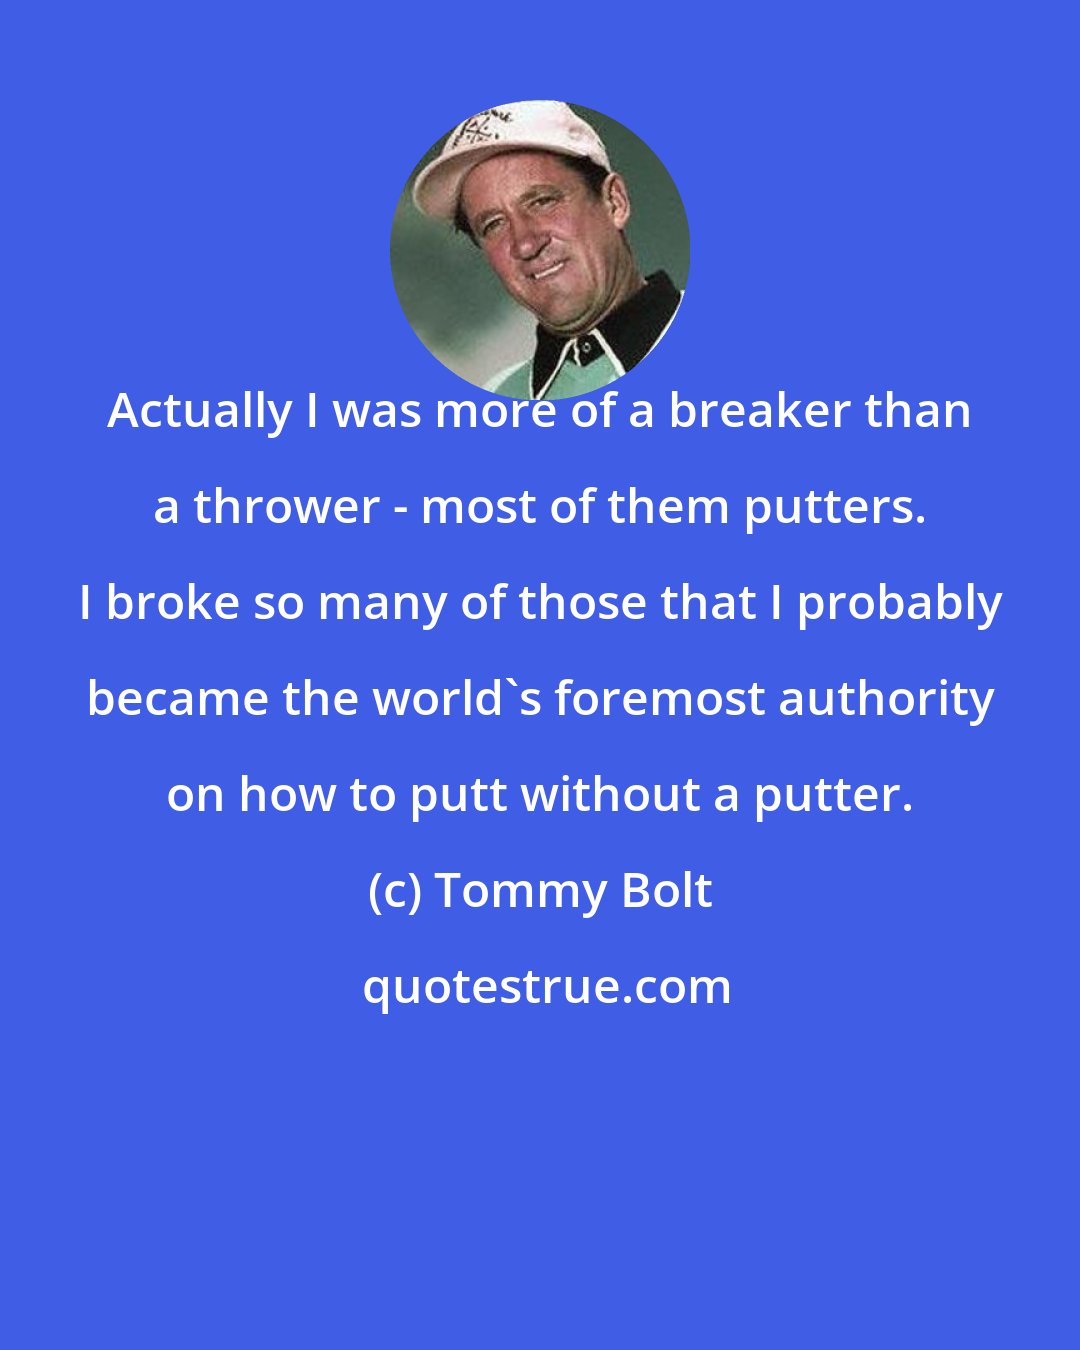 Tommy Bolt: Actually I was more of a breaker than a thrower - most of them putters. I broke so many of those that I probably became the world's foremost authority on how to putt without a putter.